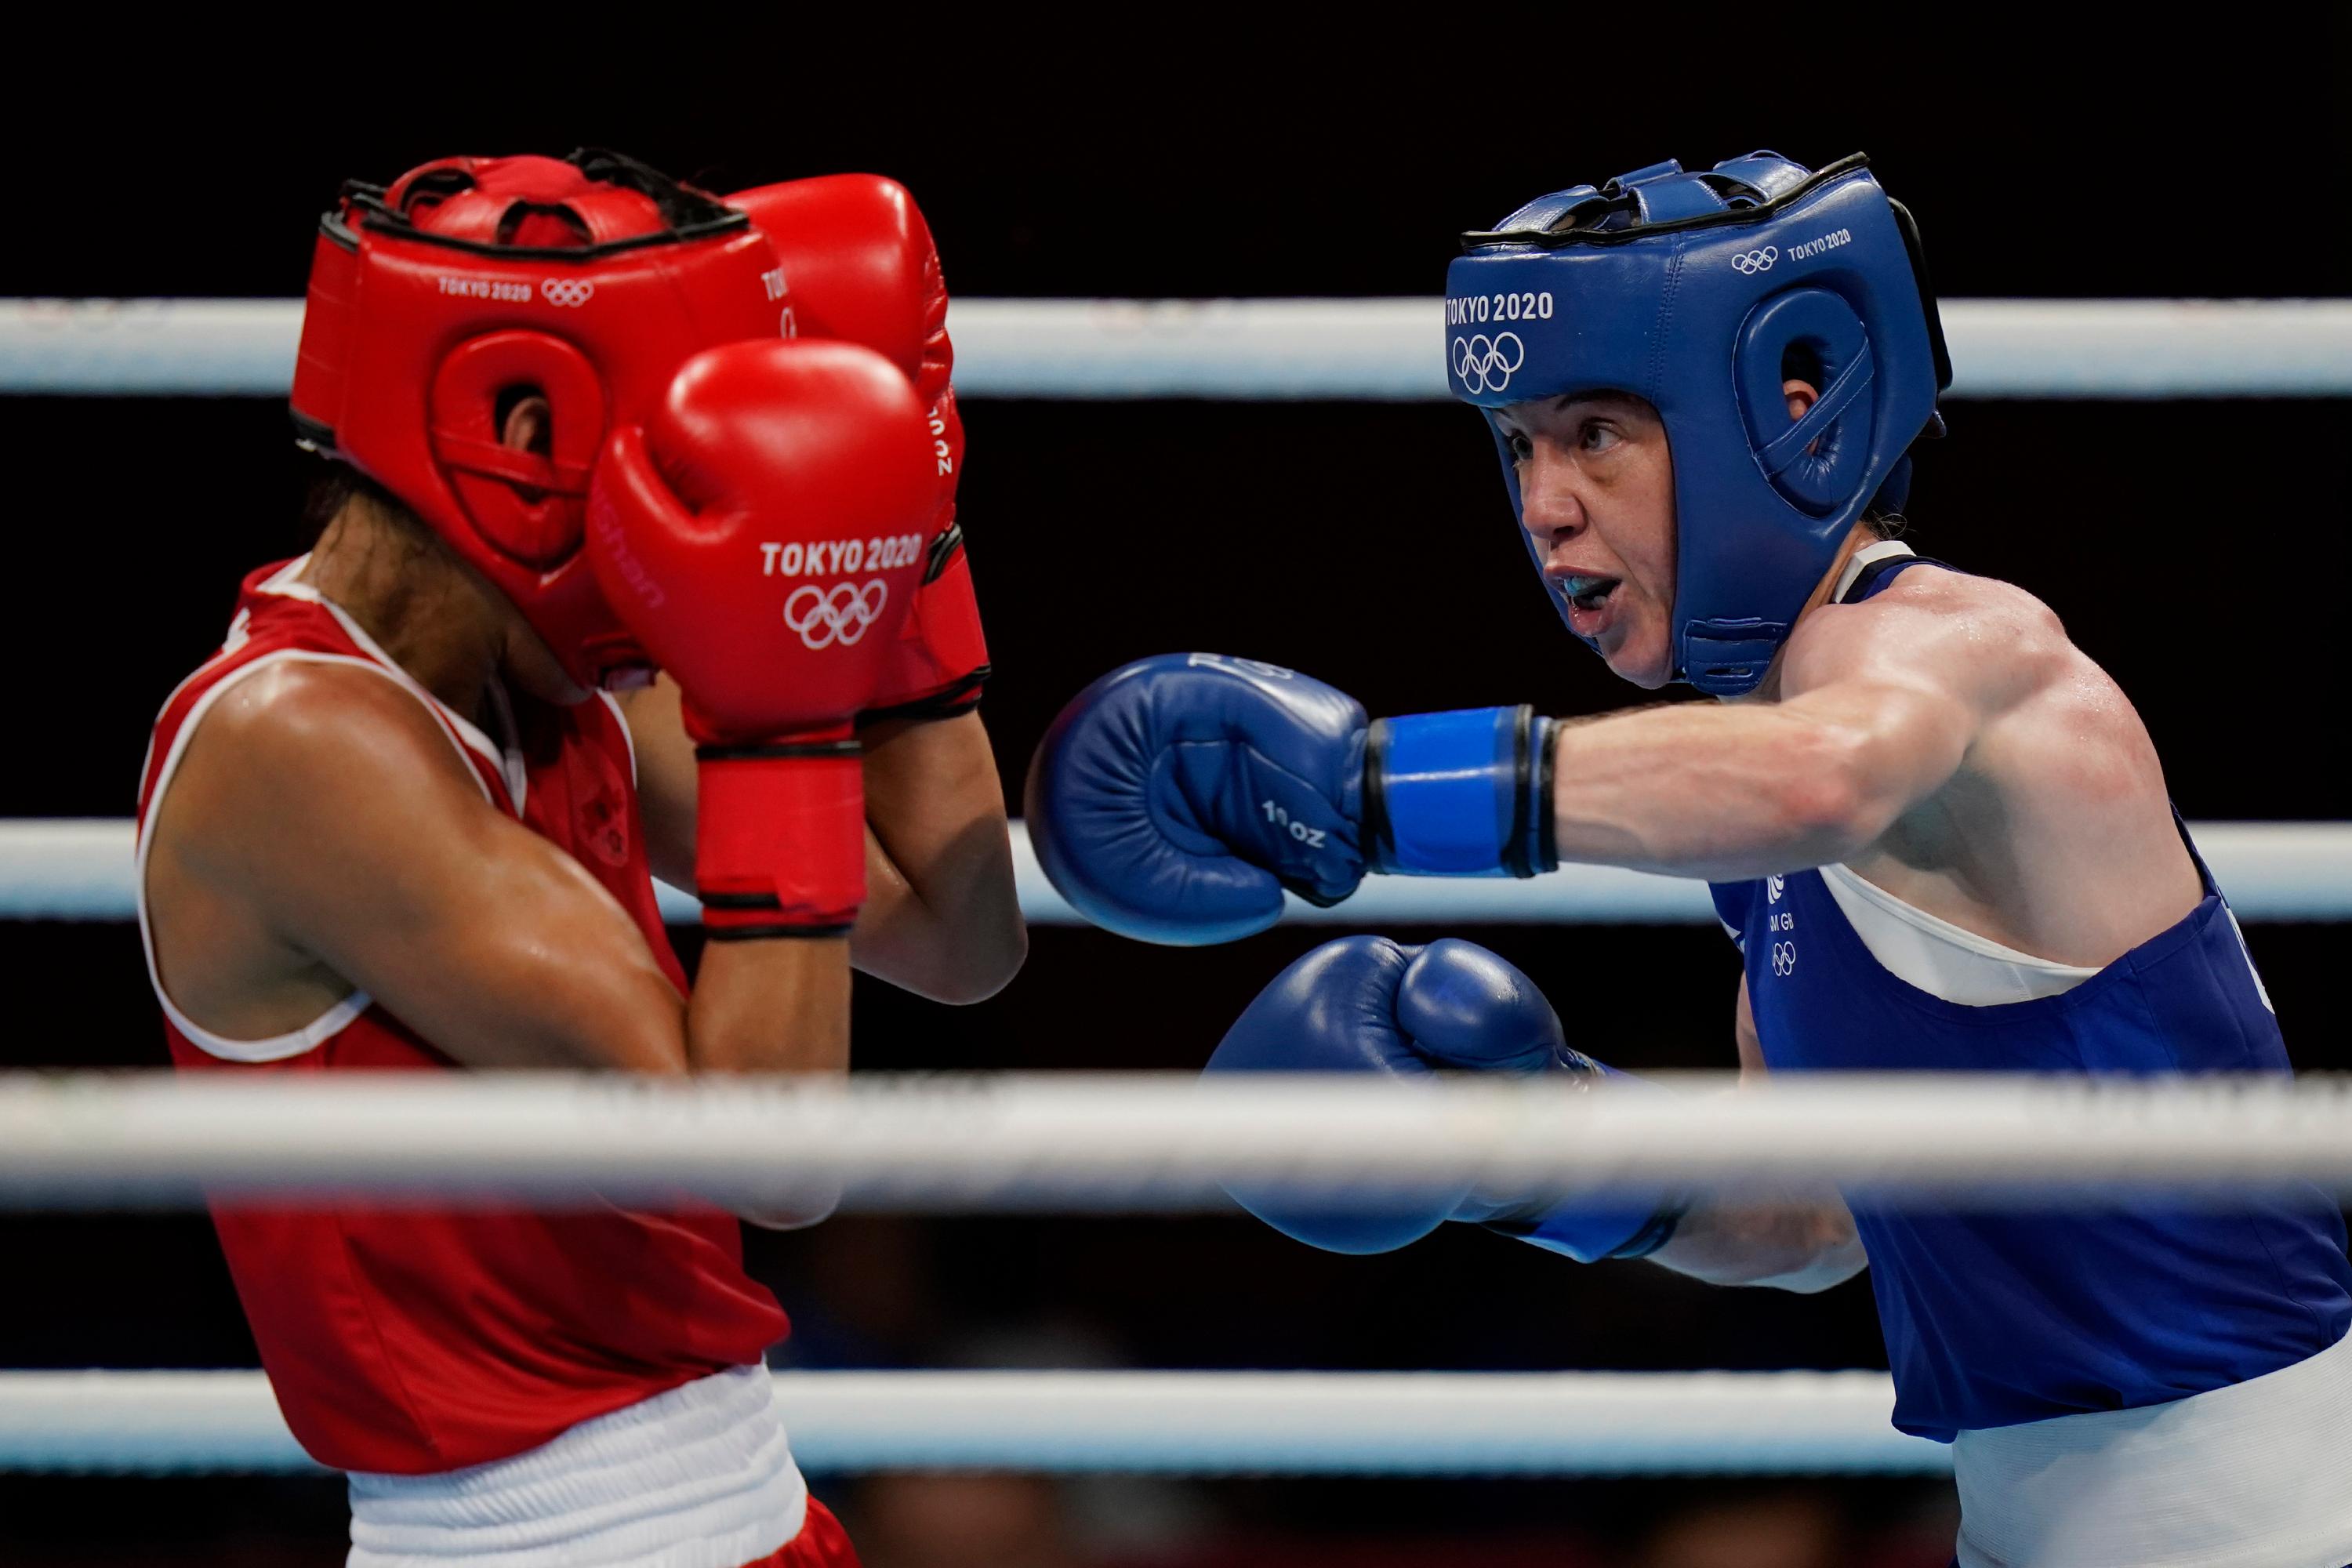 Two female boxers compete at the 2020 Summer Olympics in Tokyo, Japan.